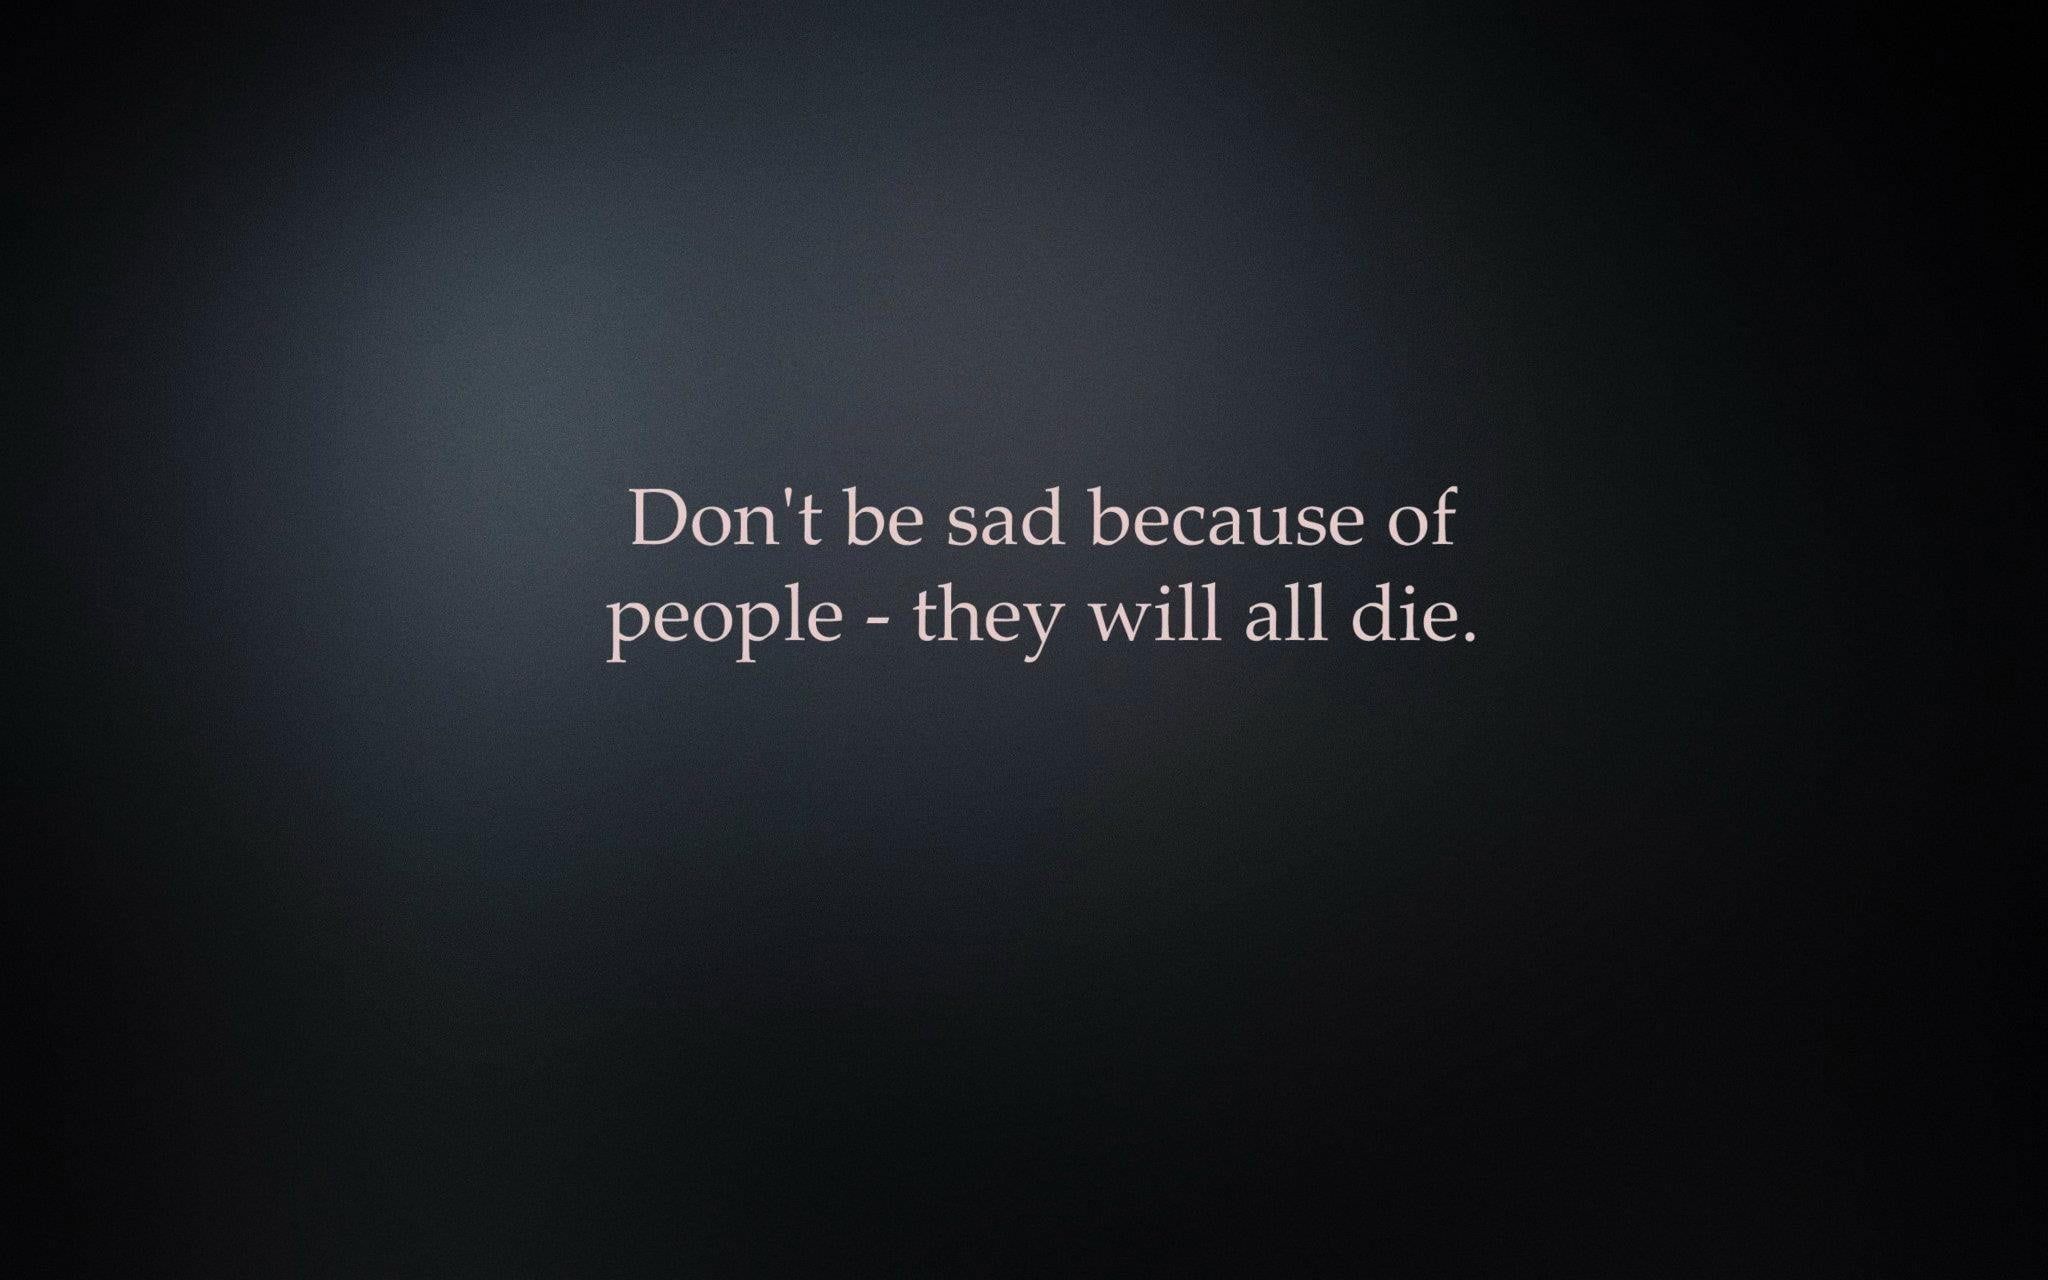 Don't be sad because of people will add dei wallpaper • Wallpaper For You HD Wallpaper For Desktop & Mobile